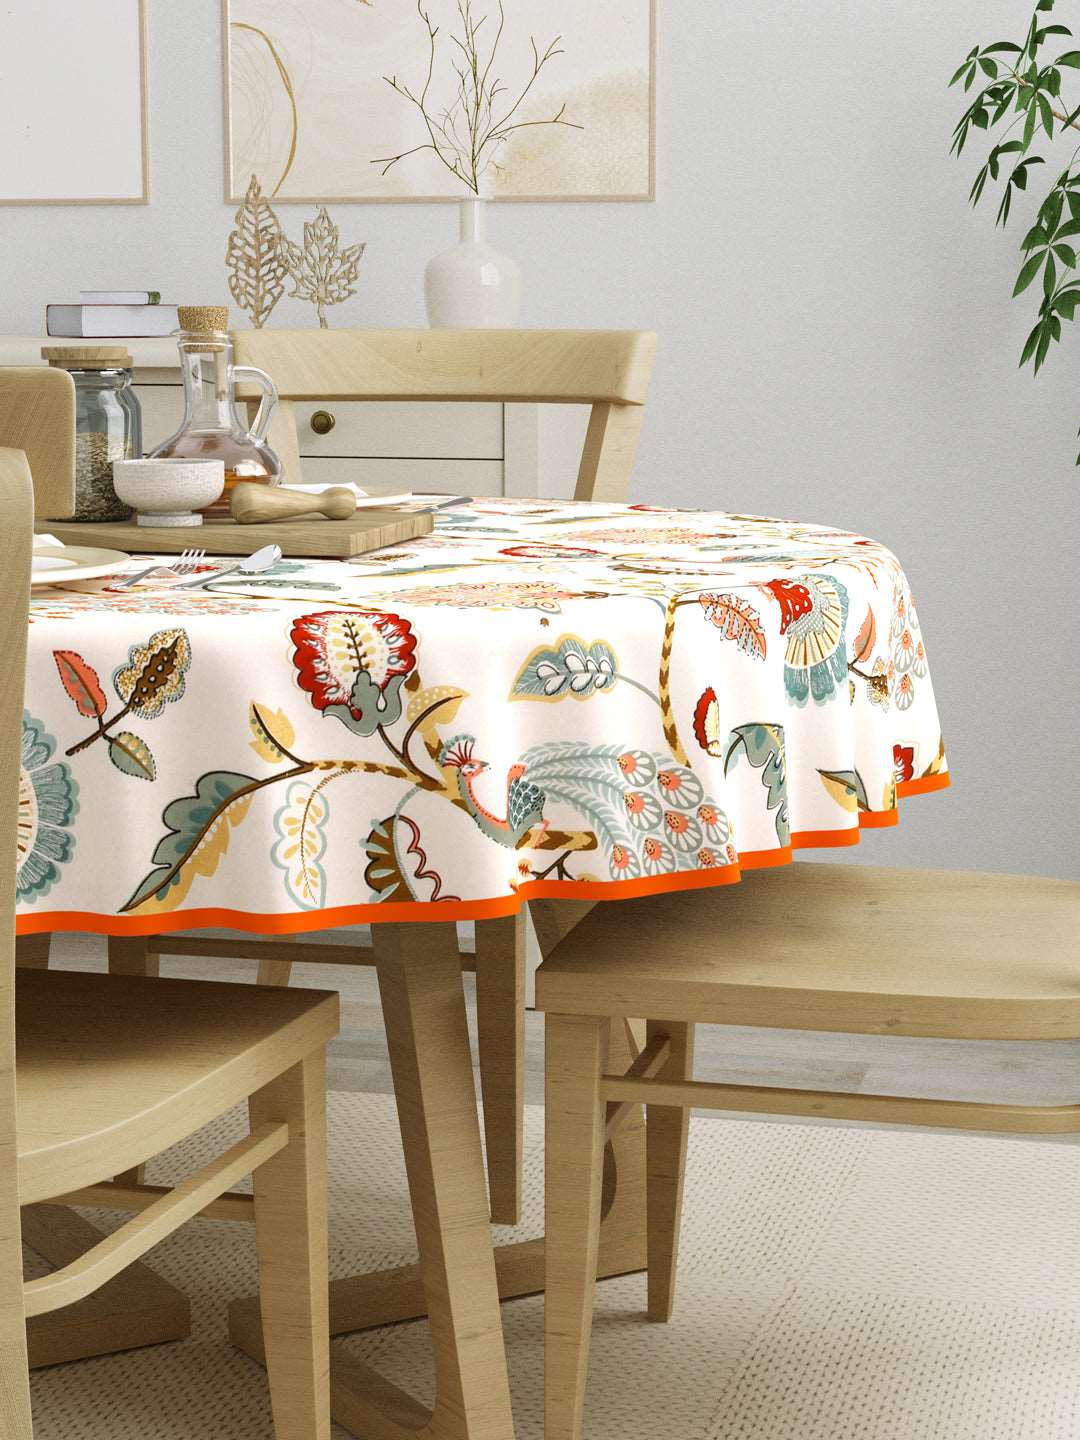 100% Cotton 4 Seater Round Table Cover; 60x60 Inches; Multicolor Peacock